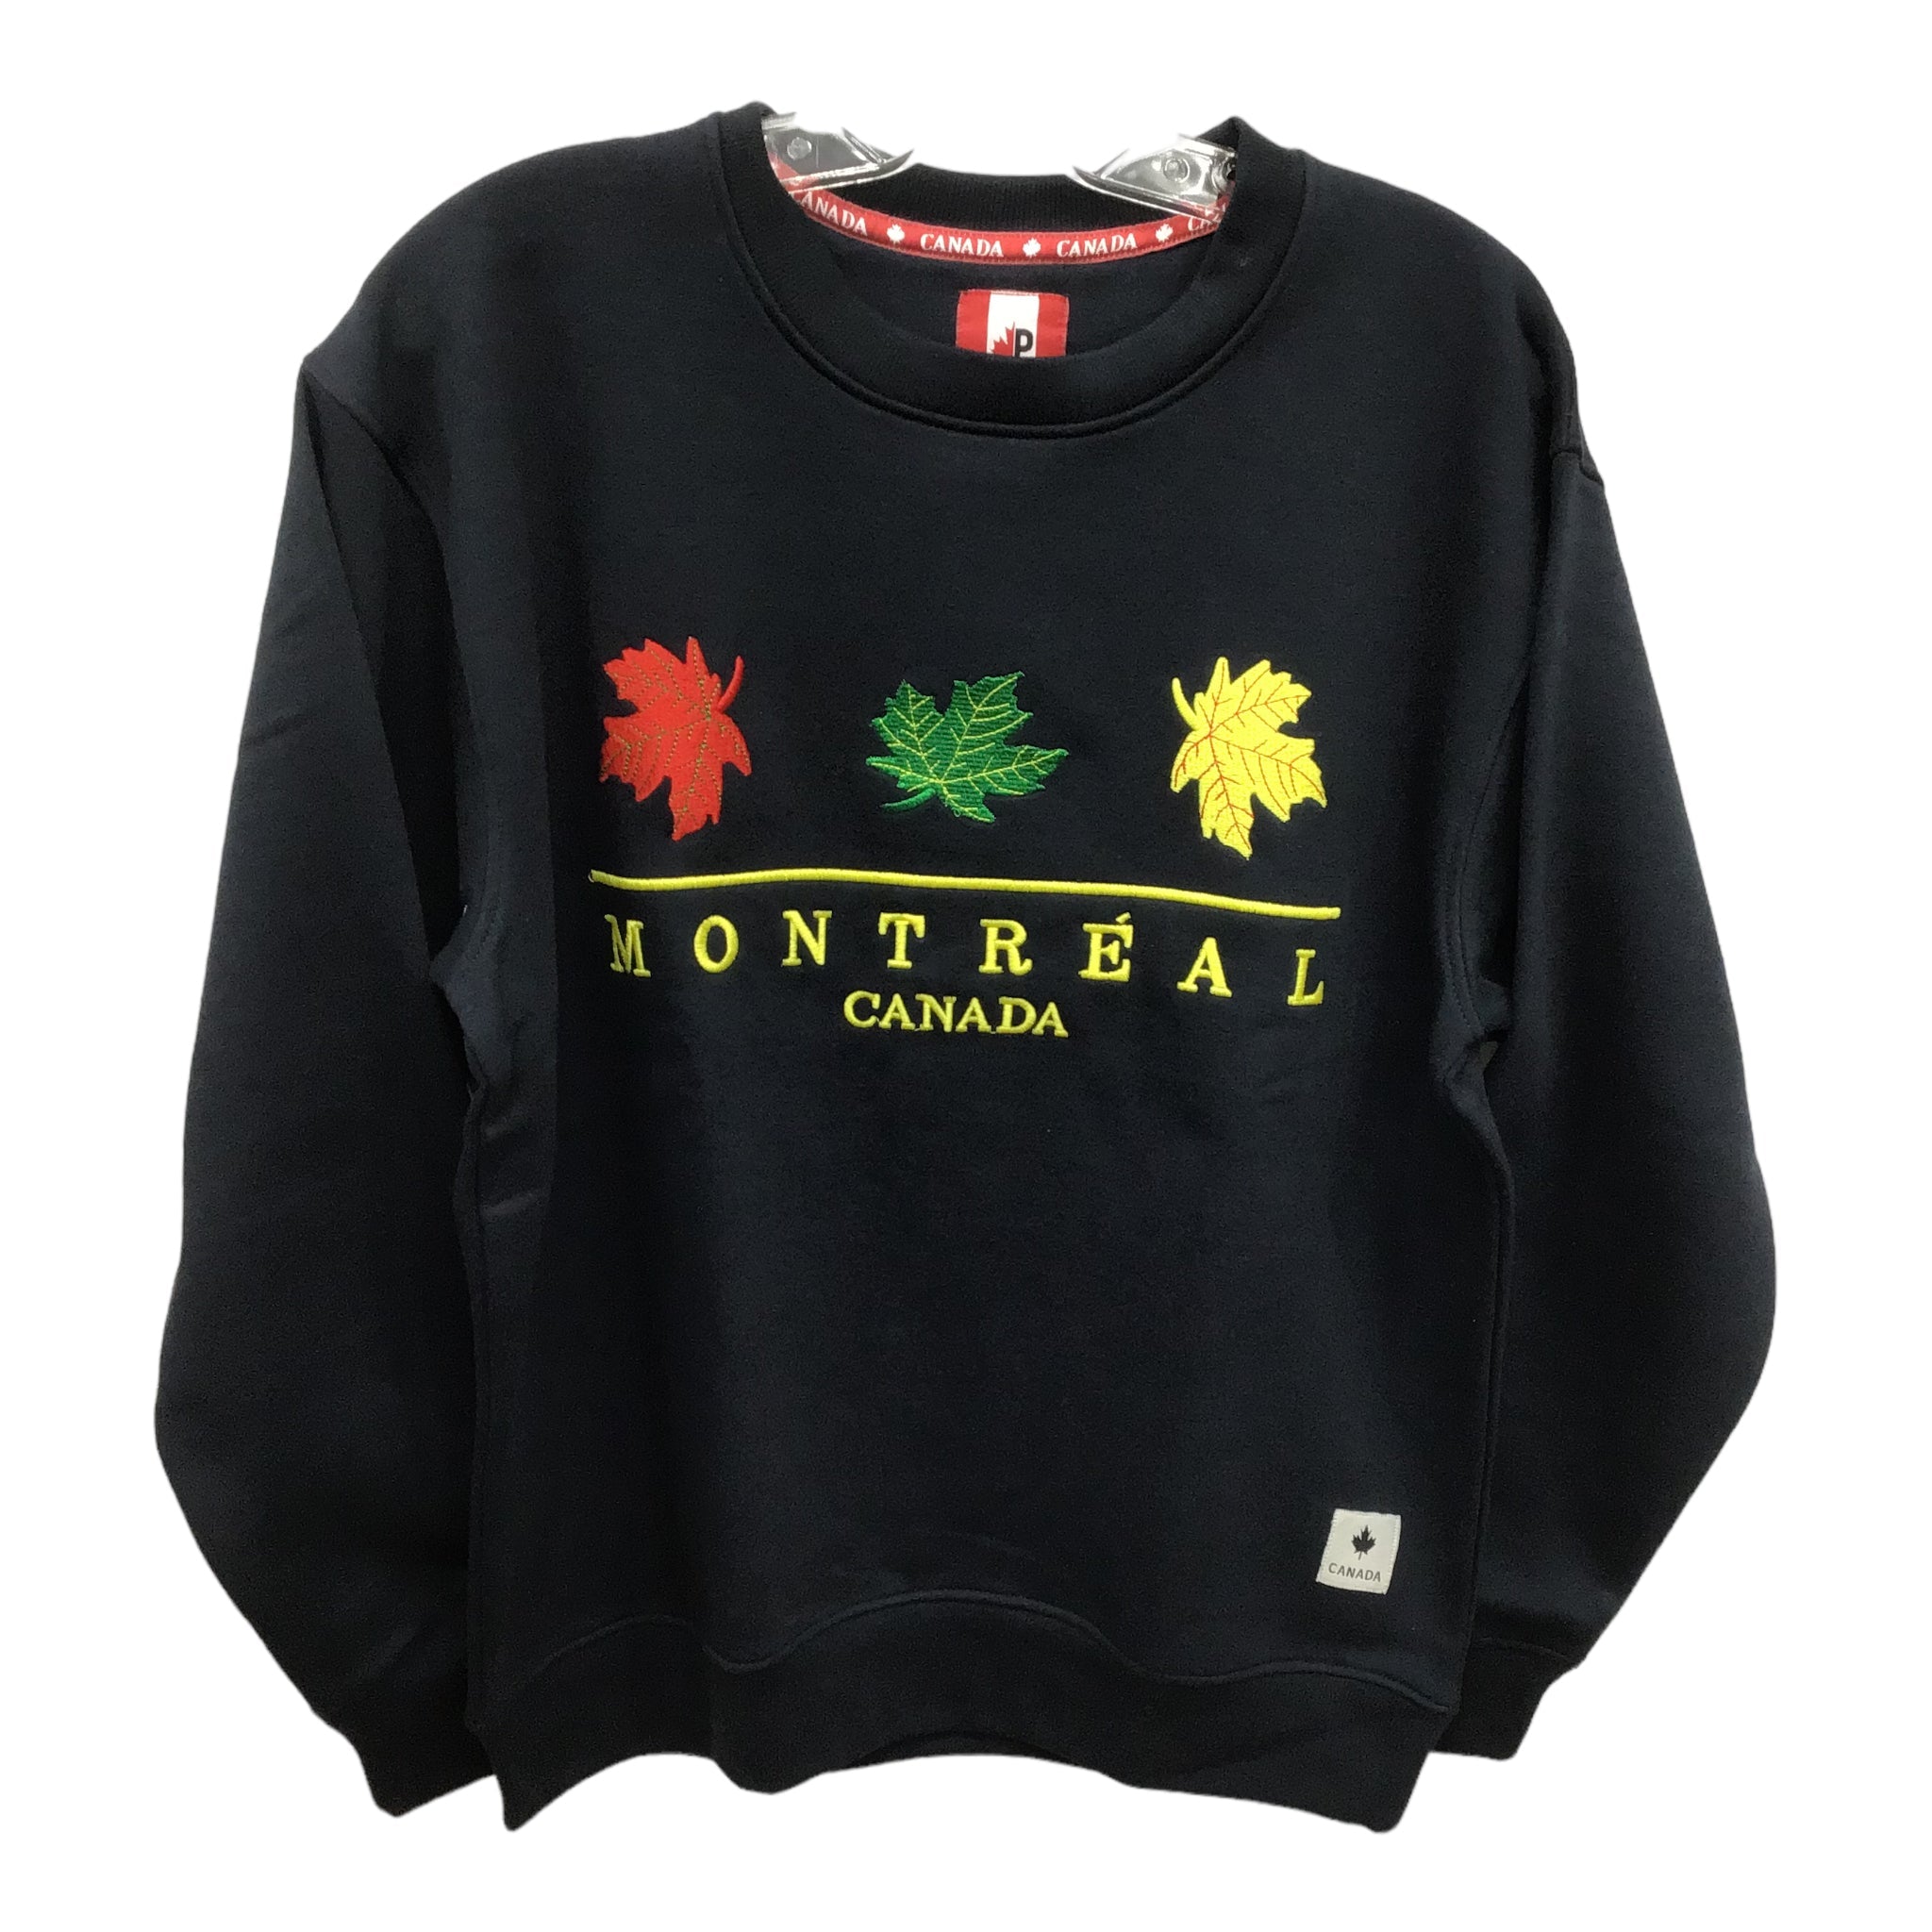 Montreal Crew Neck Sweatshirt Navy W/ Red Green & Yellow Maple Leaf Embroidery for Men and Women